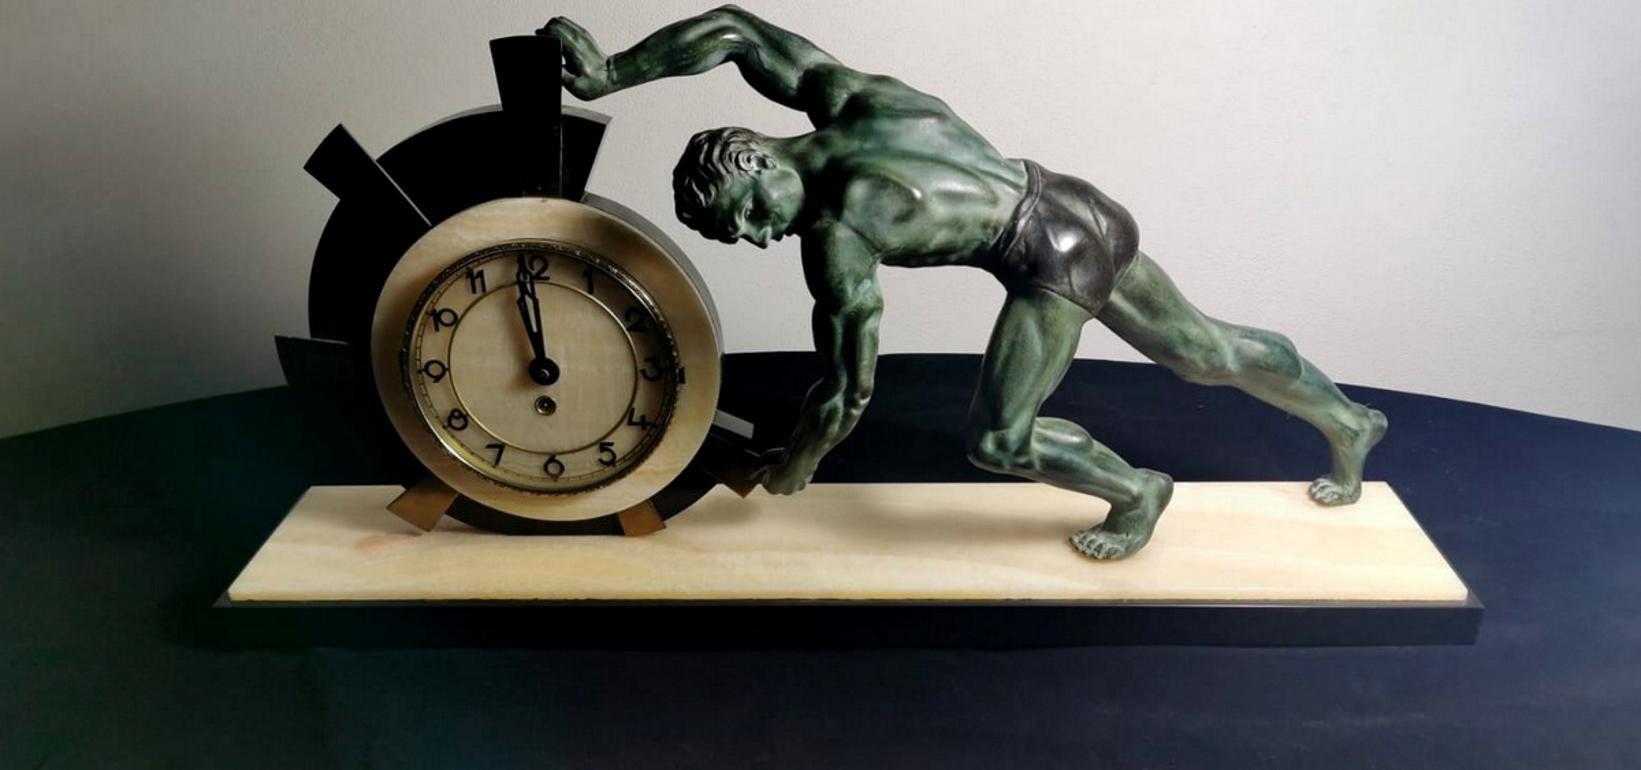 We kindly suggest you read the whole description, because with it we try to give you detailed technical and historical information to guarantee the authenticity of our objects.
Huge and stunning clock with a bronze statue. Extraordinary piece of